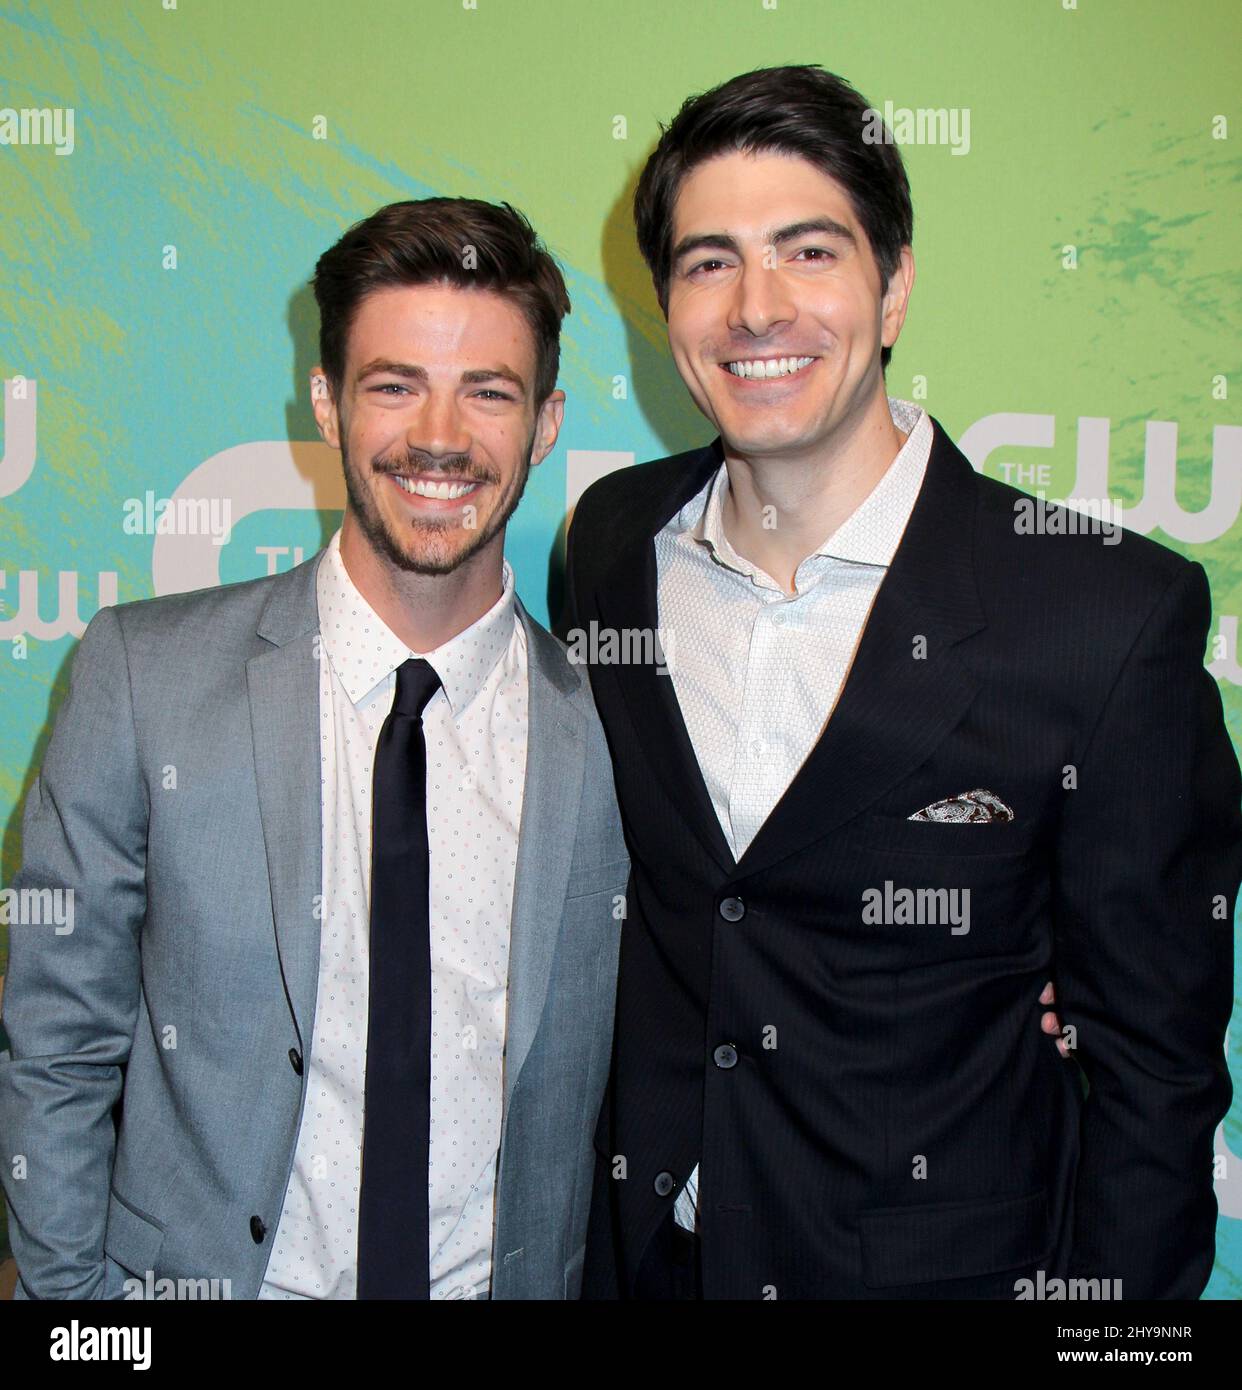 Grant Gustin And Brandon Routh Attending The Cw Networks 2016 Upfront